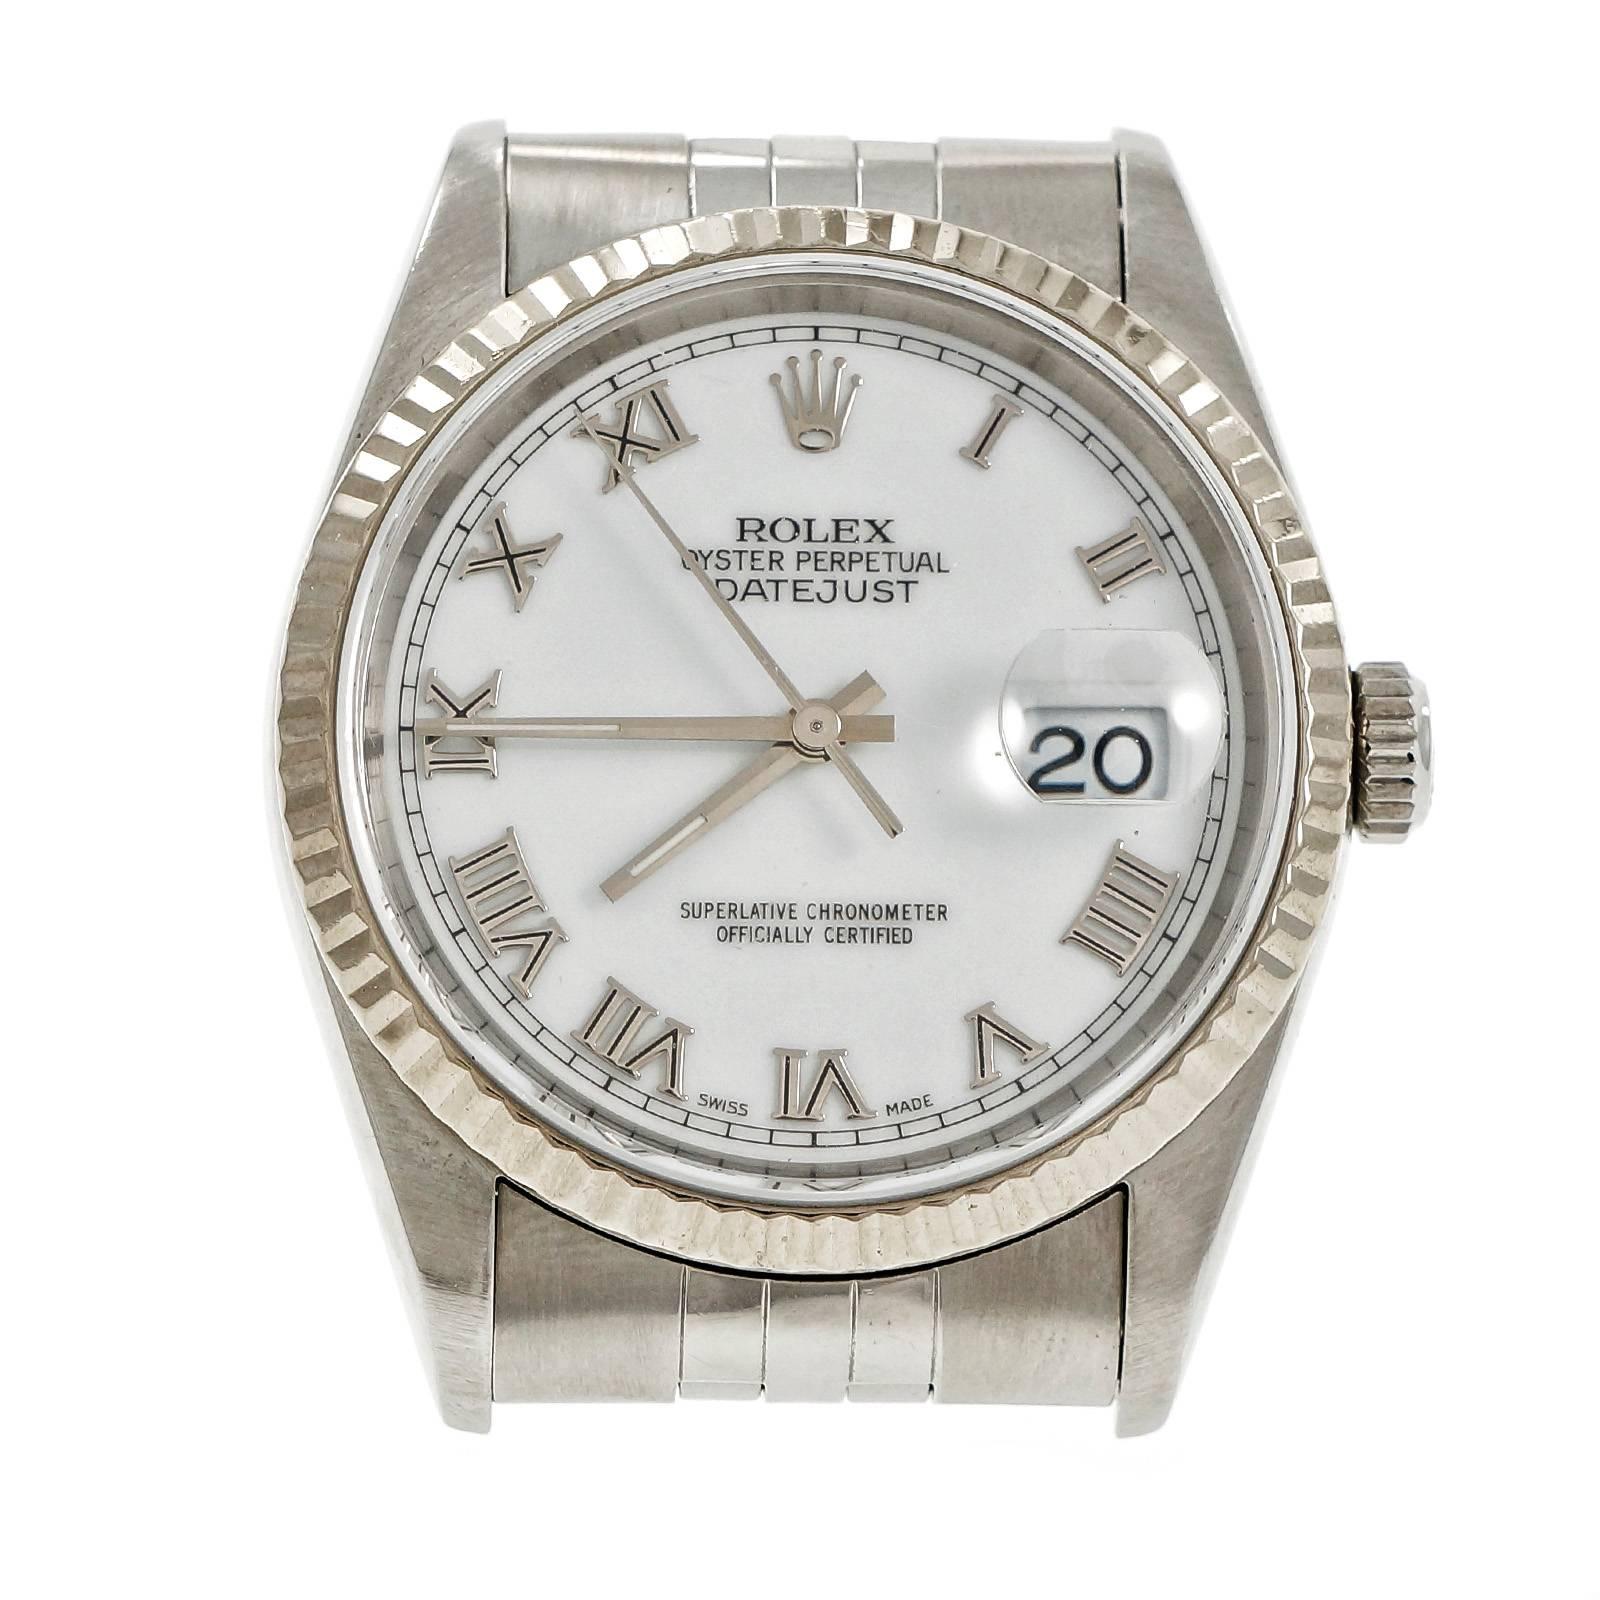 Men’s Rolex Datejust all original with white Roman numerals, Sapphire crystal and Jubilee band.

Stainless steel
93.8 grams
Band length: 8 inches
Length: 44mm
Width: 36mm
Band width at case: 20mm
Case thickness: 11.74mm
Band: Rolex Jubilee